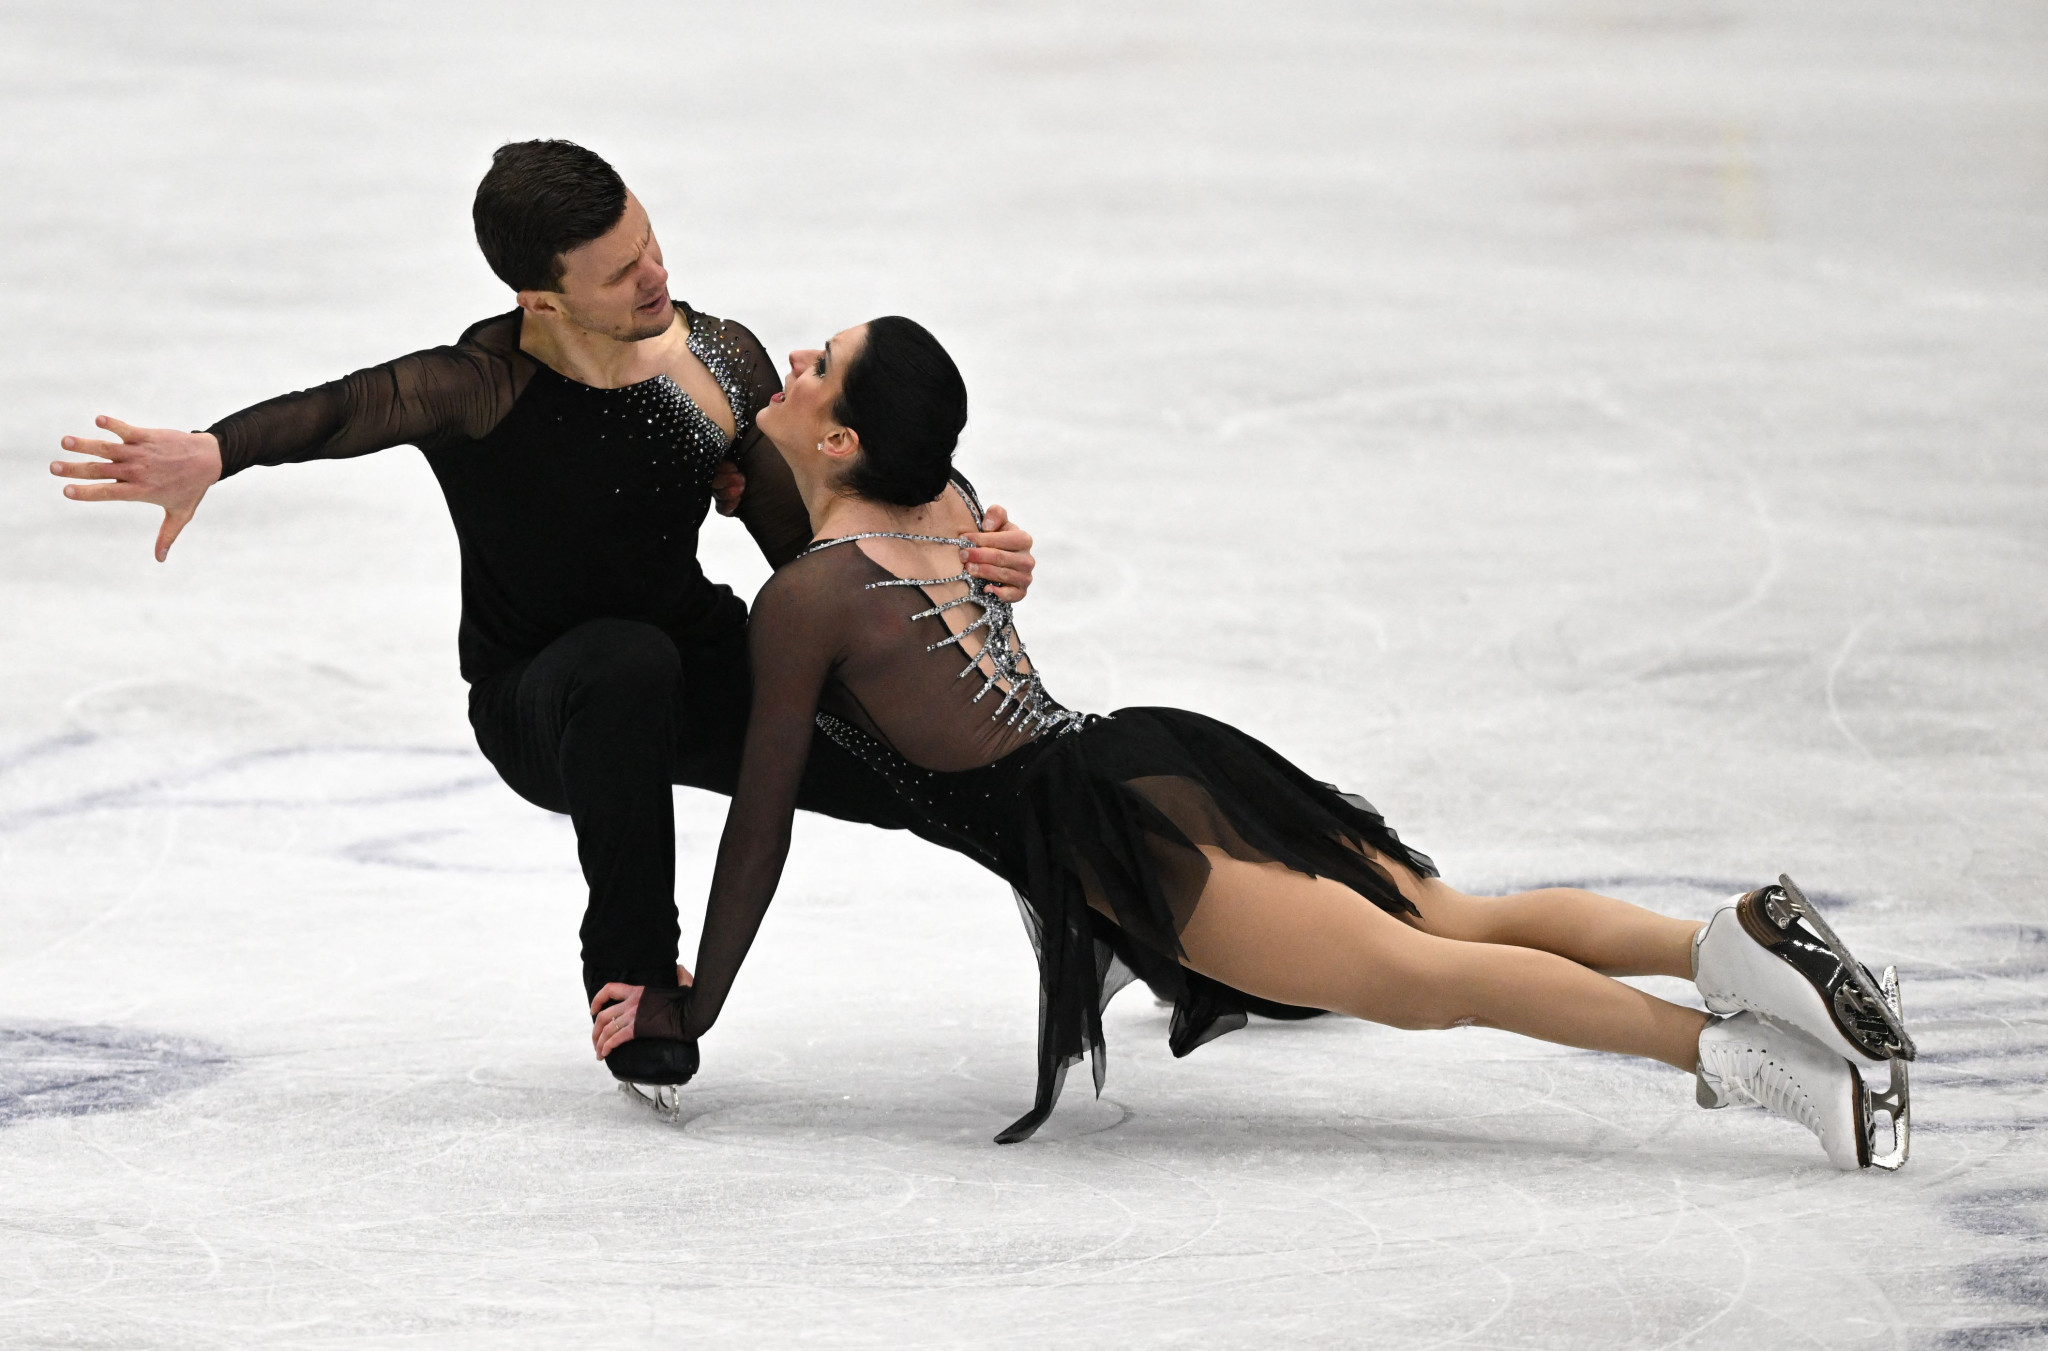 Charlene Guignard and Marco Fabbri of Italy claimed their first European gold at the ISU European Figure Skating Championships ©Getty Images